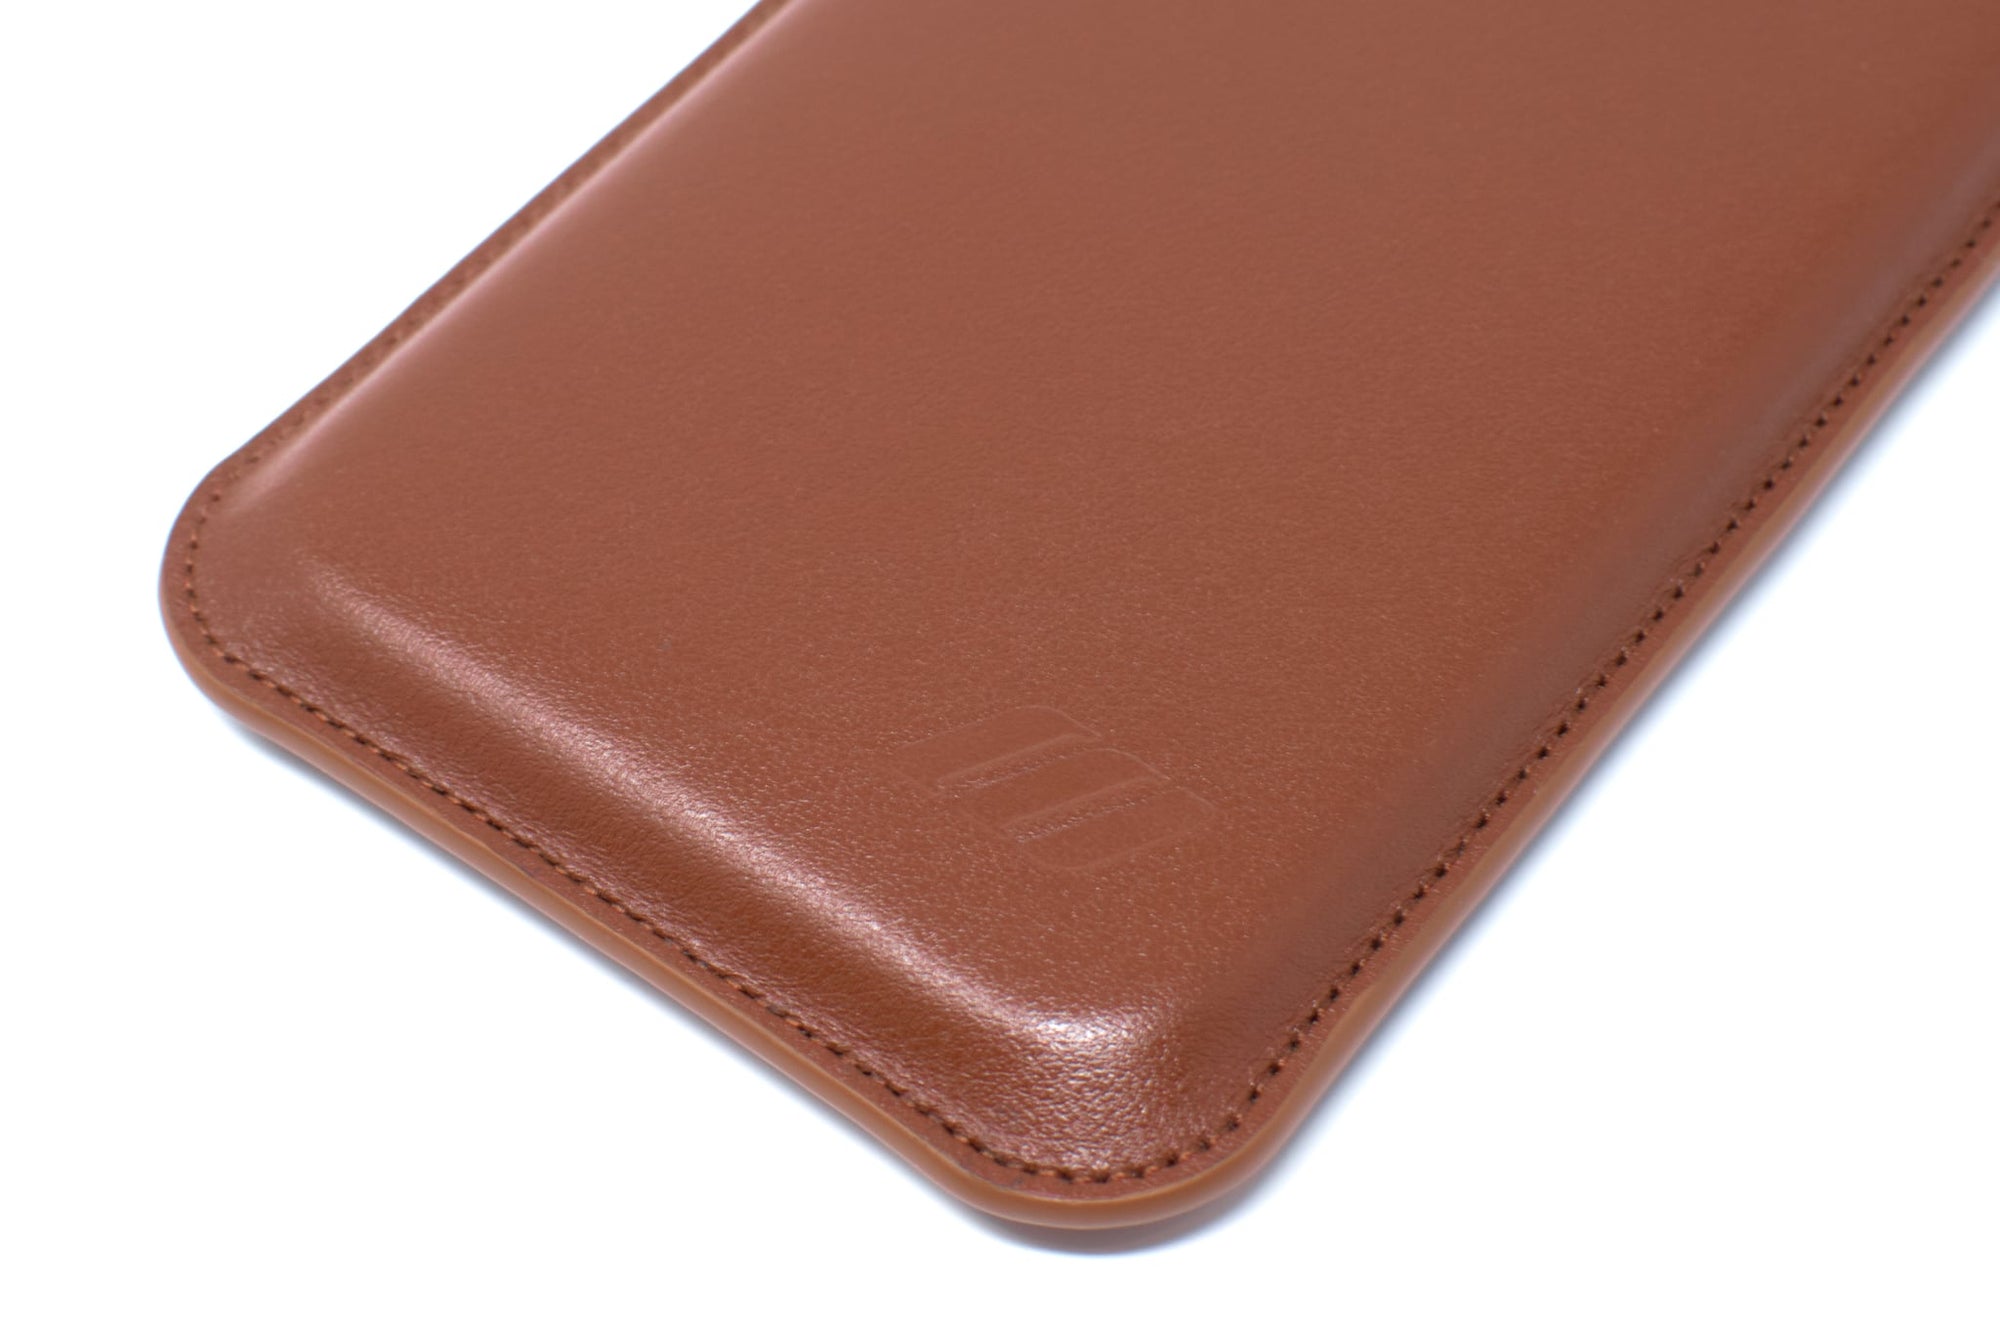 Apple iPhone 13 Pro Max Leather Sleeve Case - Skinny Fit - Acorn Brown